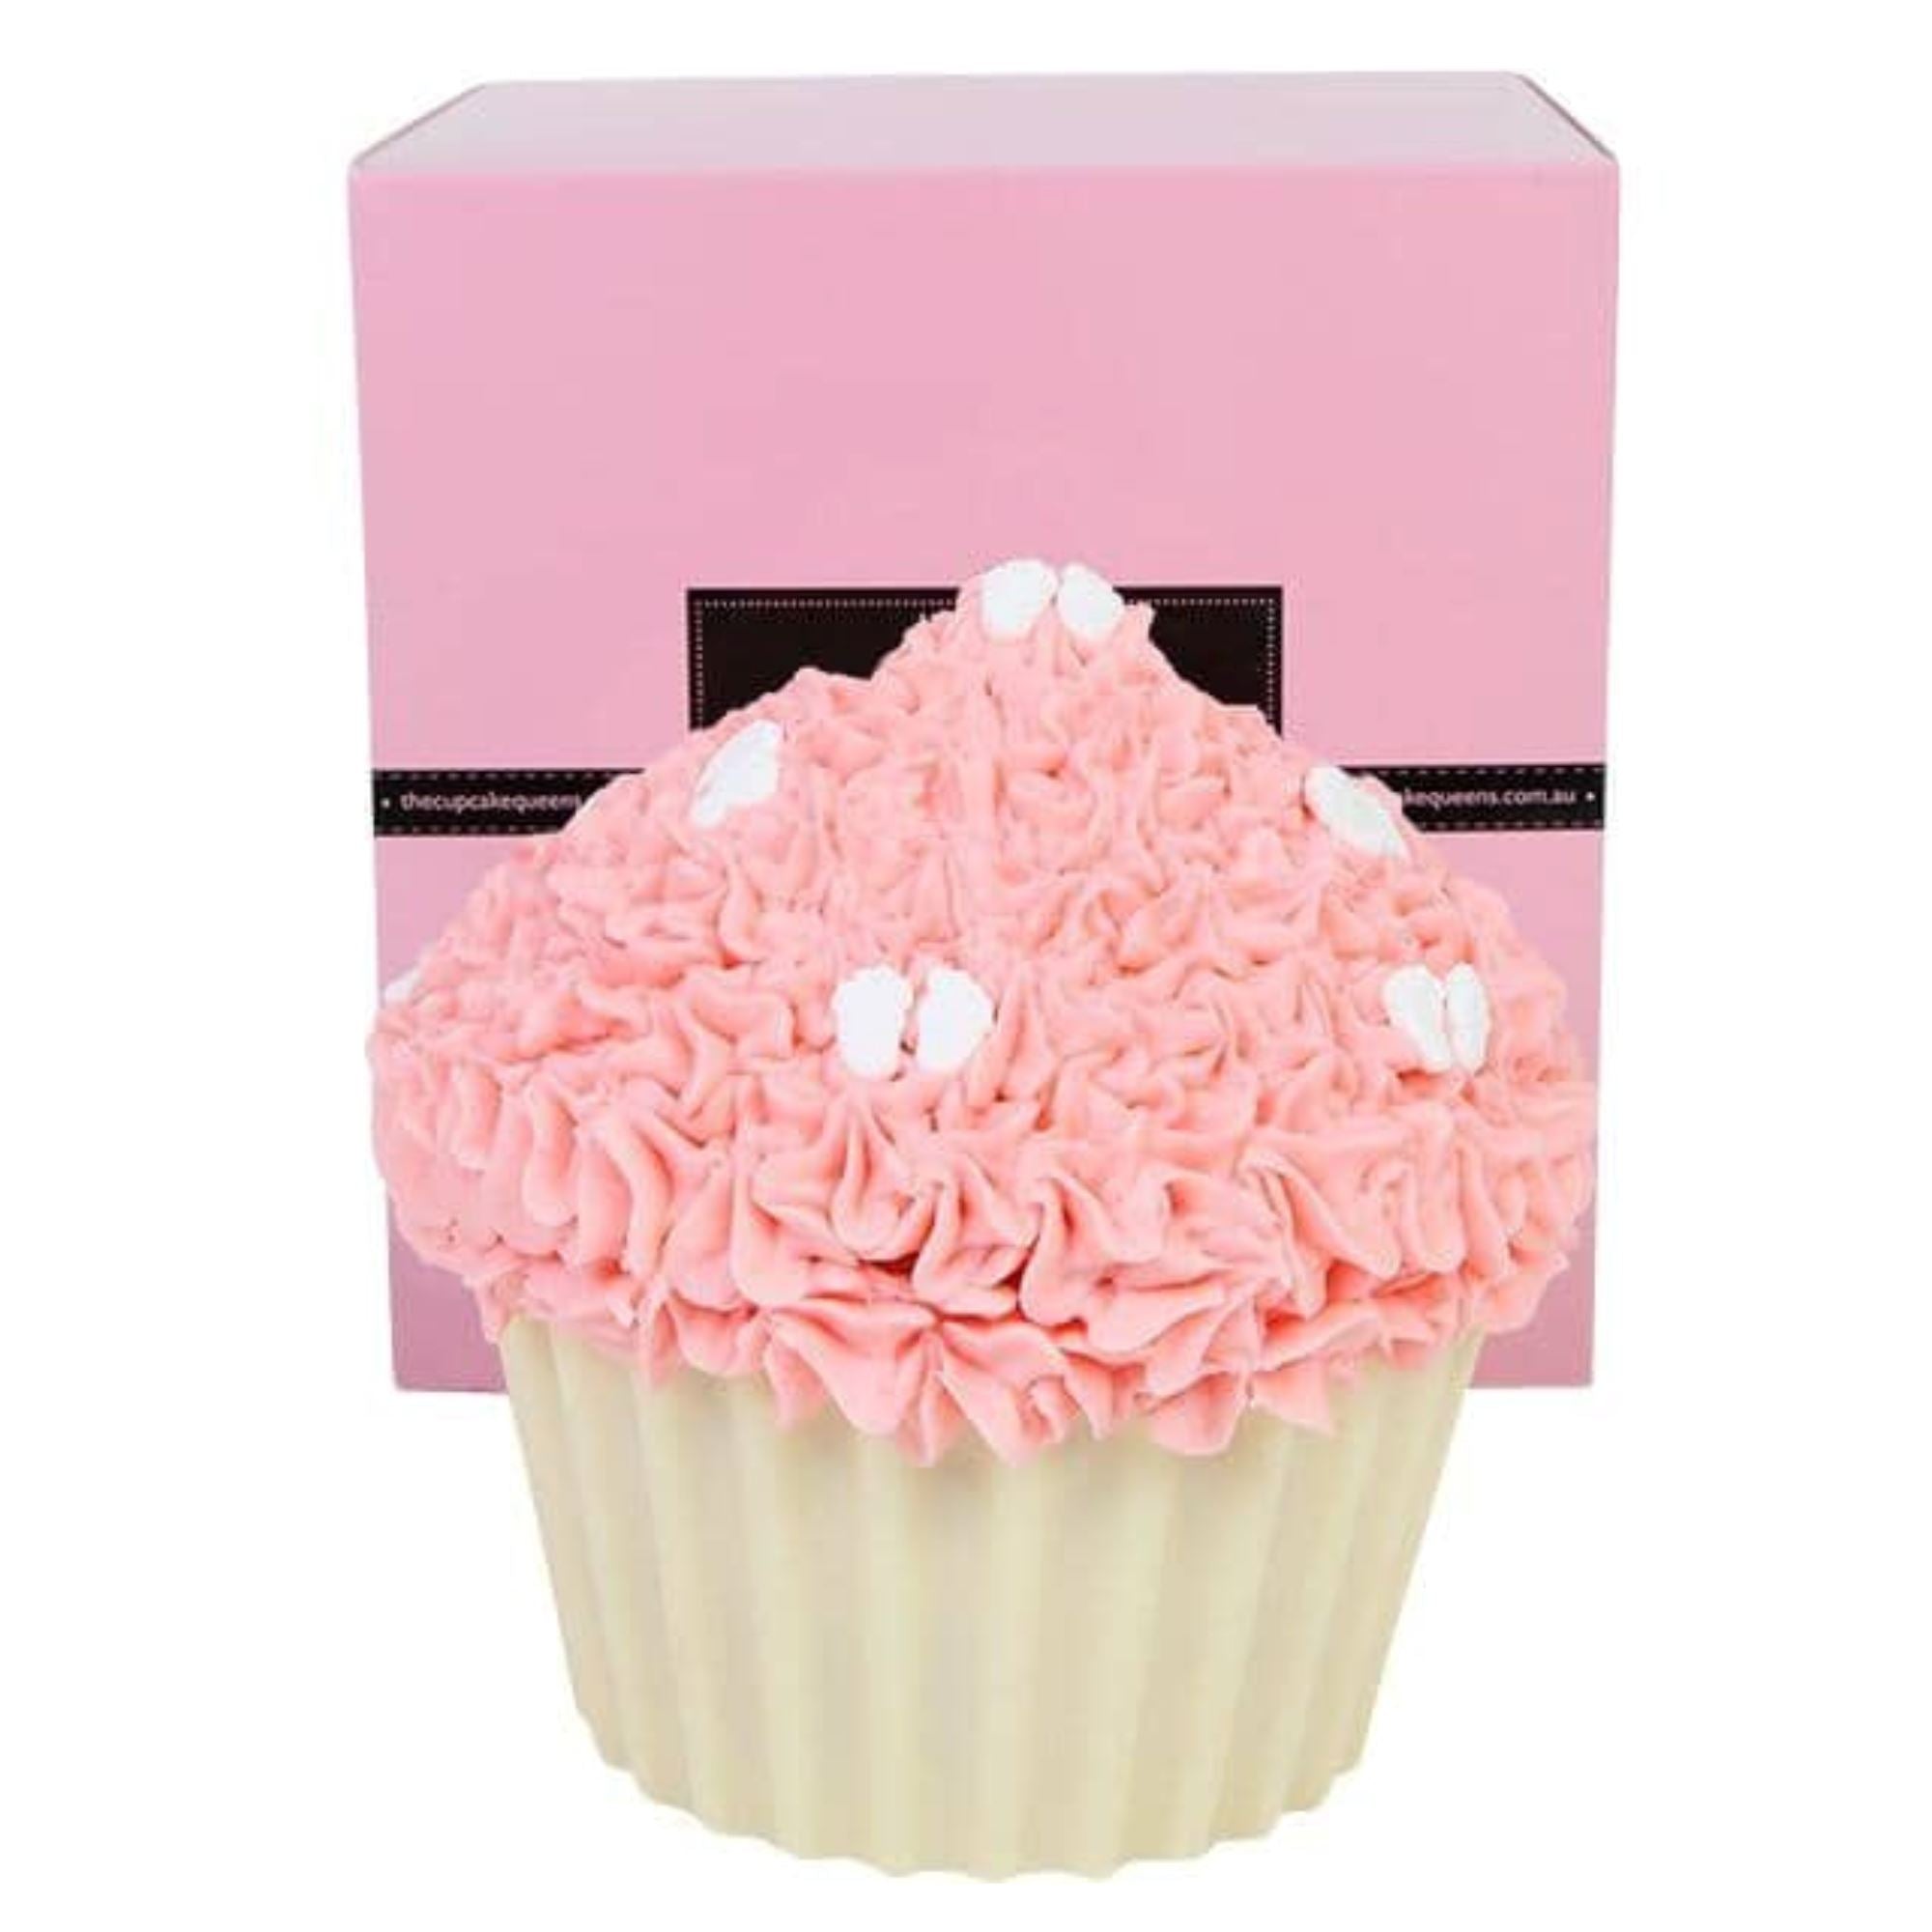 Pink Vanilla Giant Cupcake with Baby Feet Cakes The Cupcake Queens 